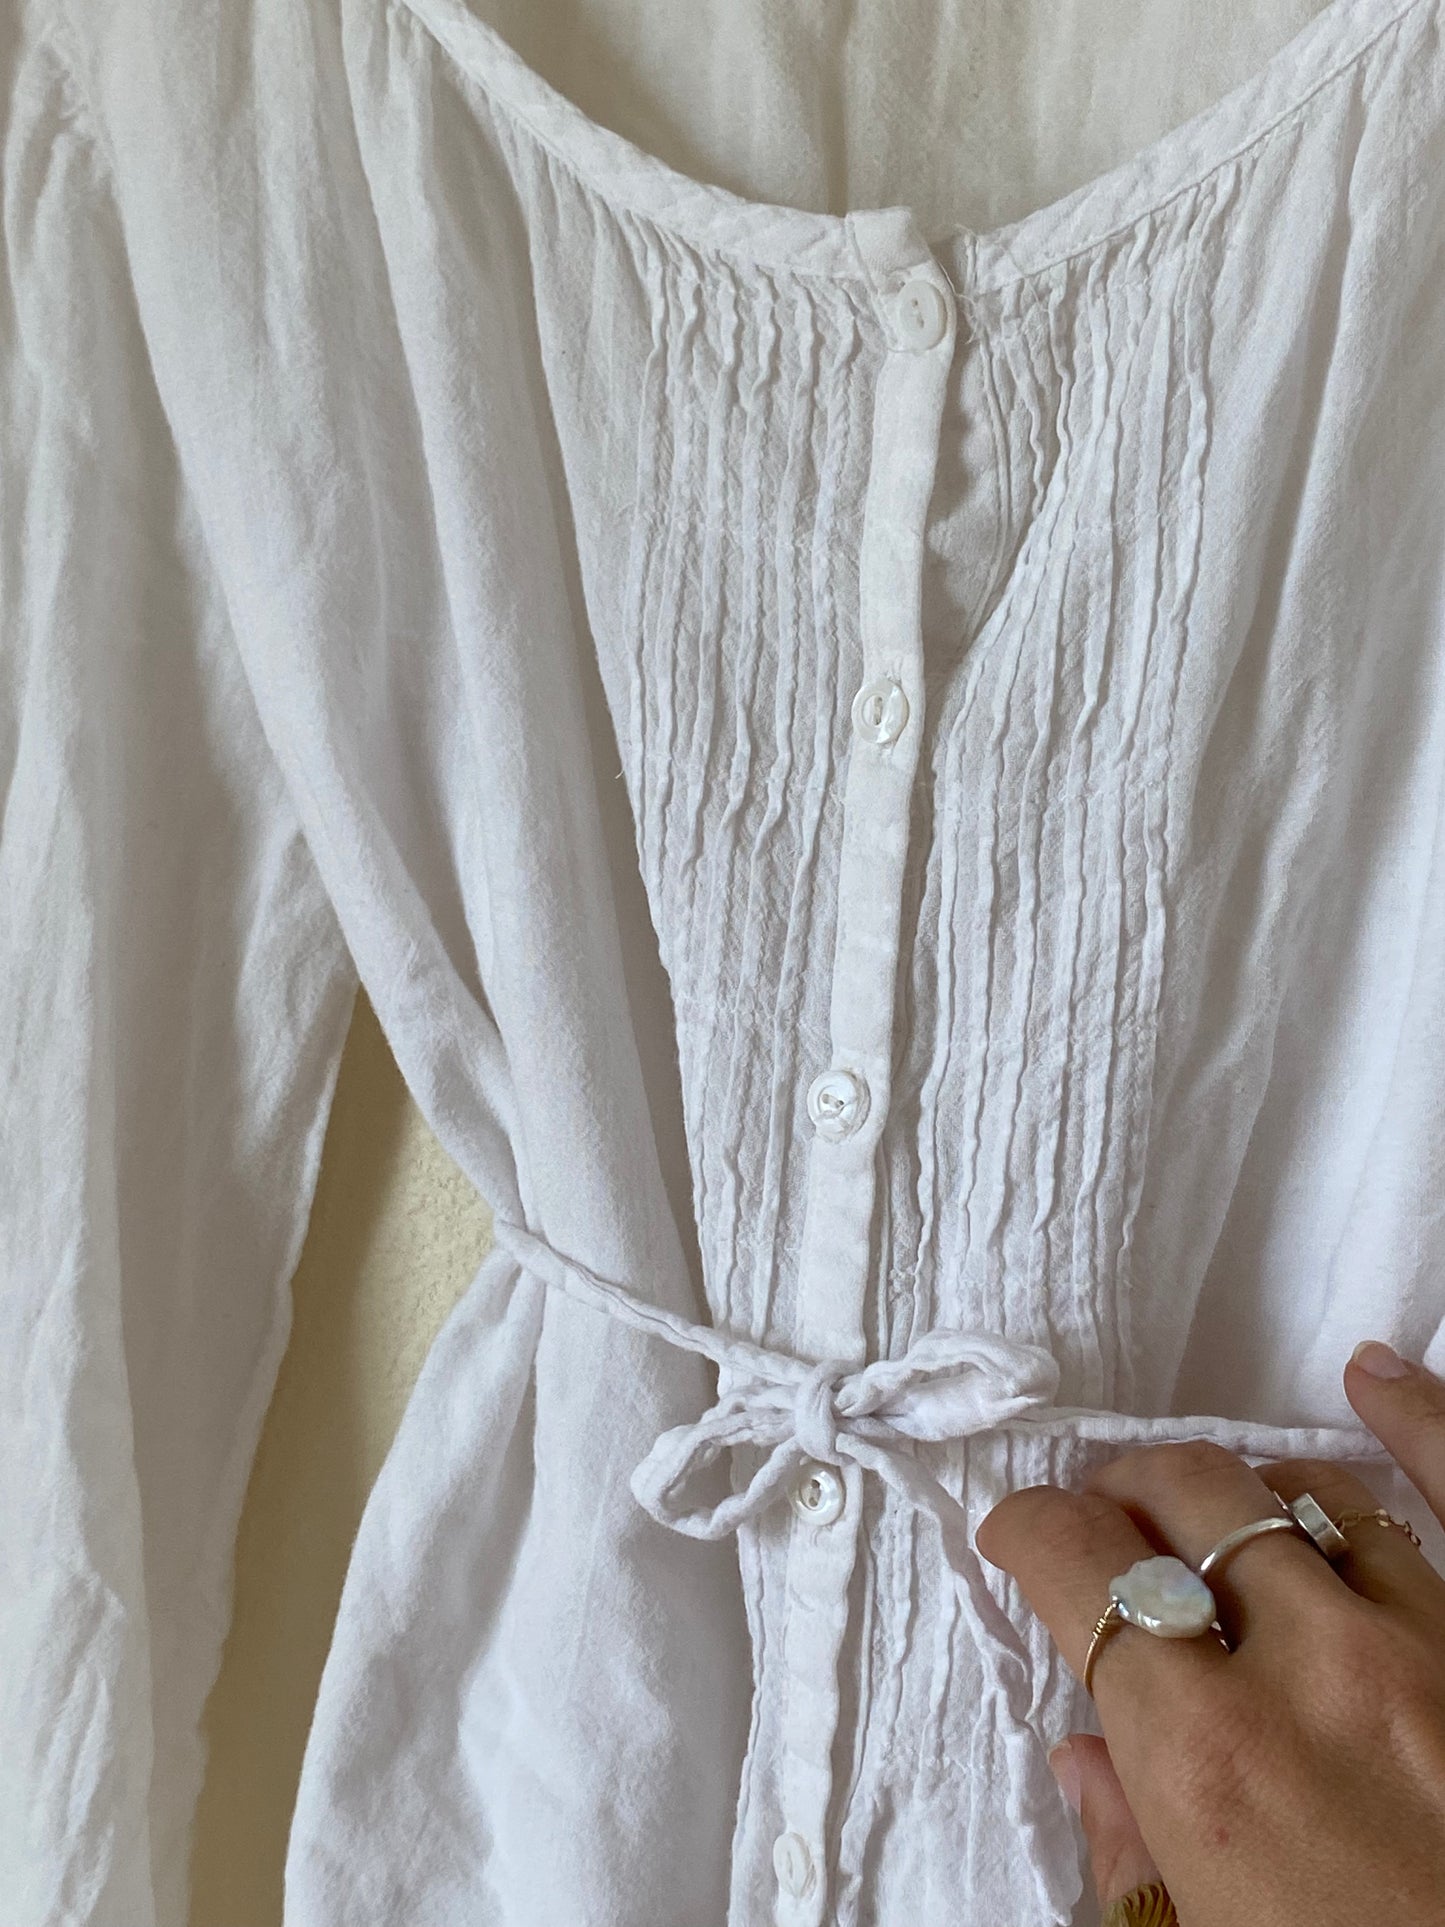 White Linen Button Up Top LARGE